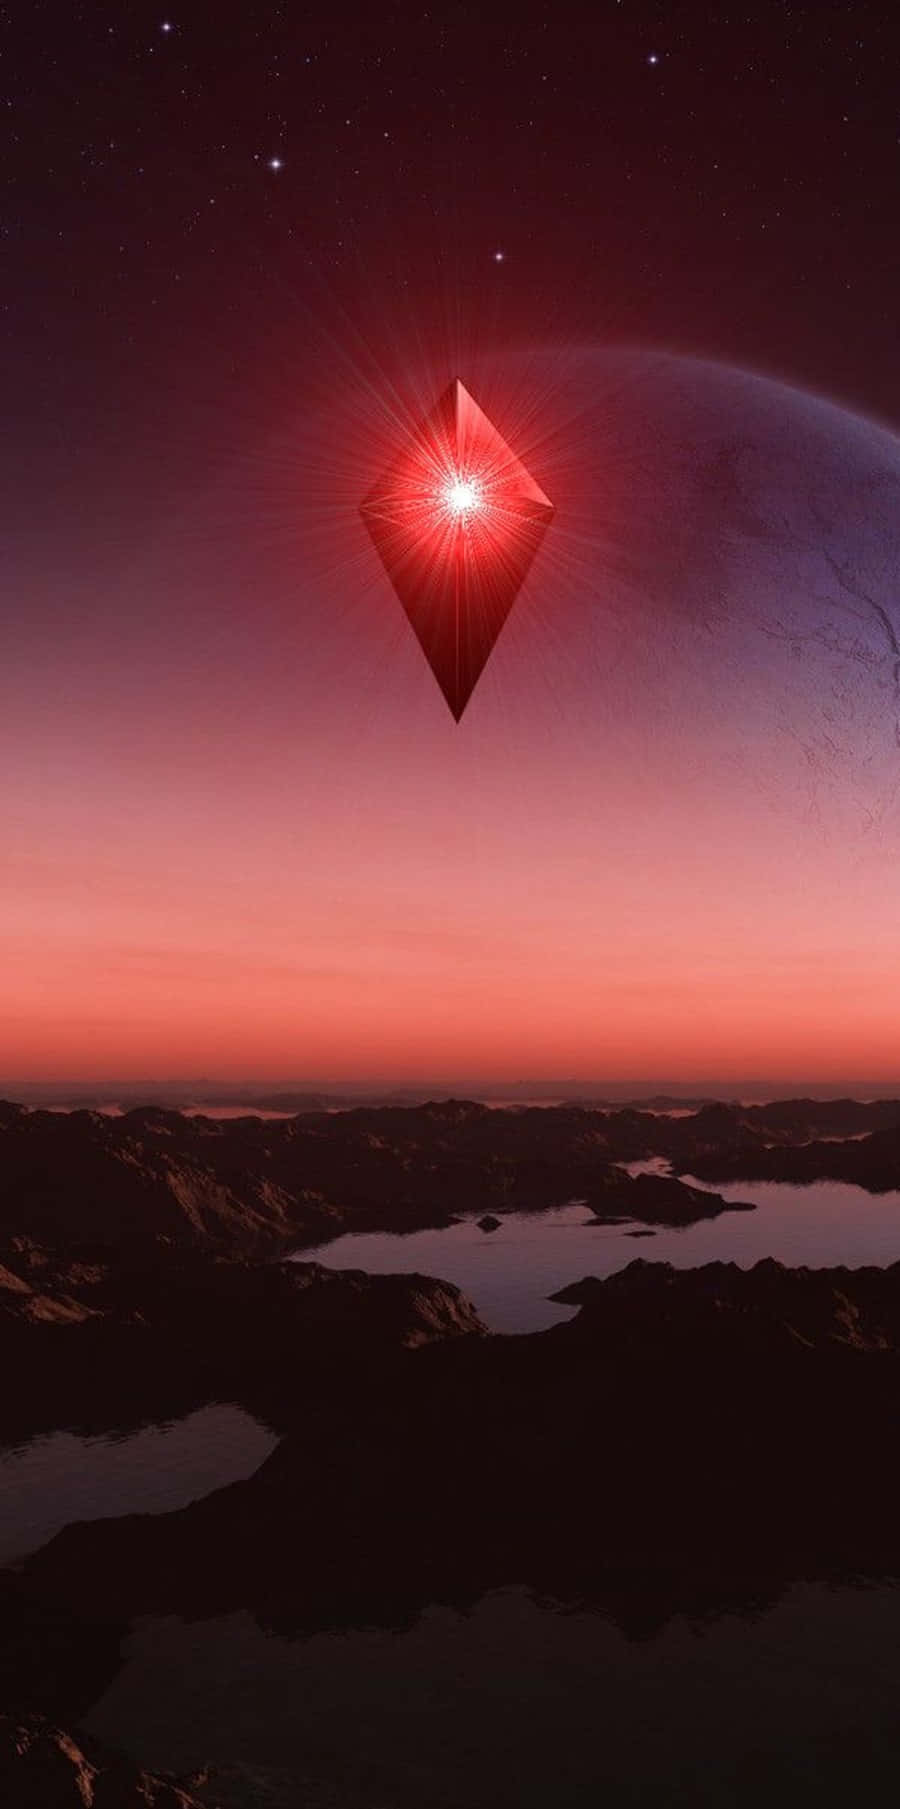 A Red Diamond Is Flying Over A Lake And Mountains Wallpaper